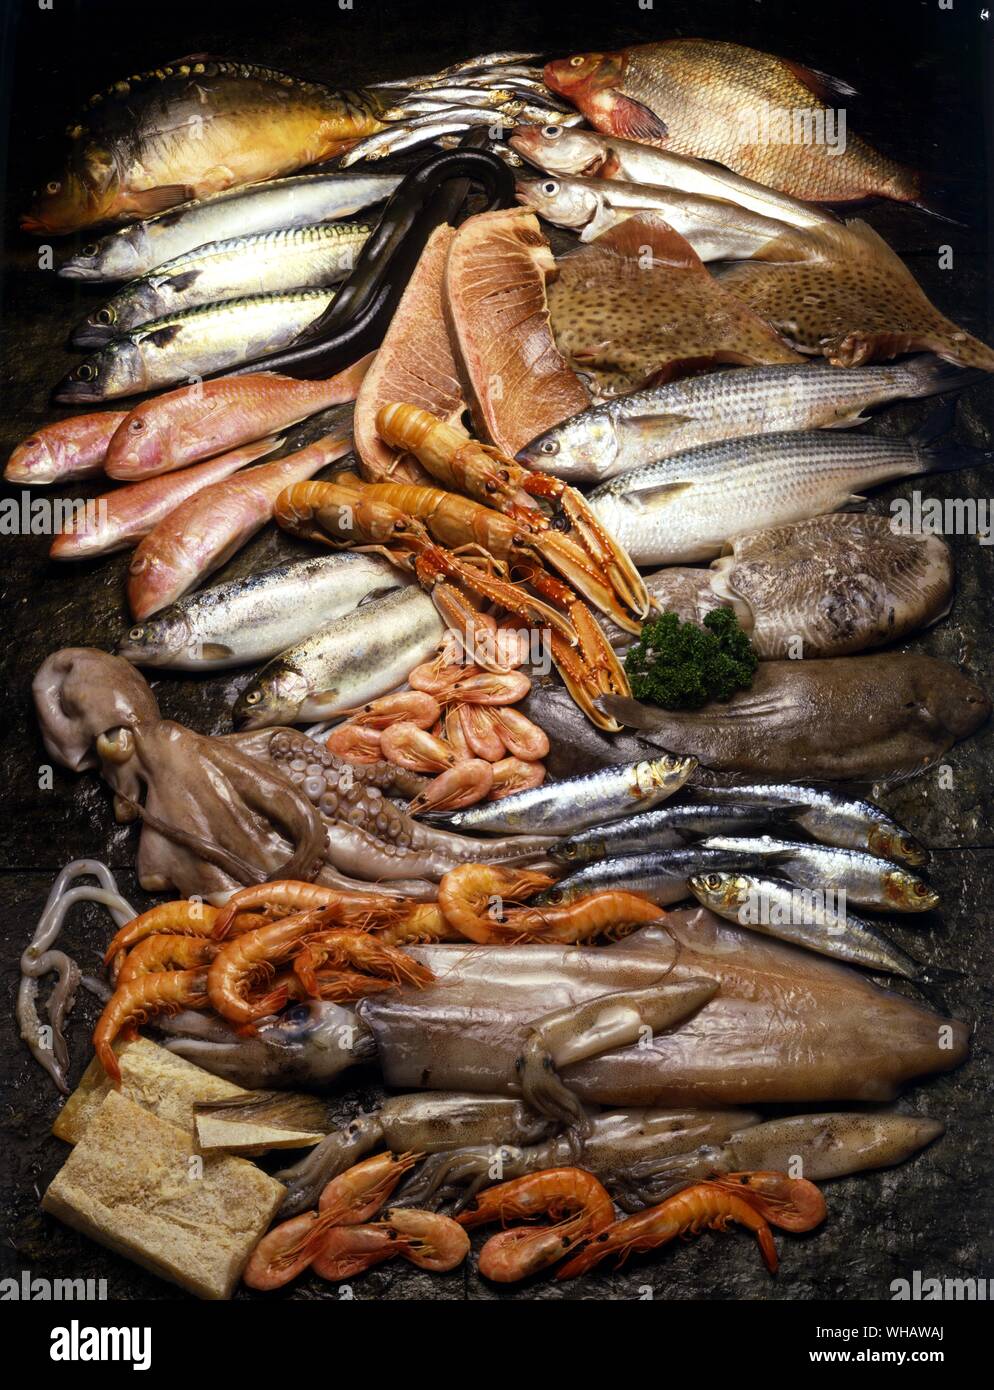 Italian Cooking By Robin Howe. . Carp, Anchovies, Freshwater Bream, Mackerel, Eel, Whiting, Red Mullett, Tuna Fish Steak, Wings Of Skate, Rainbow Trout, Dublin Bay Prawns, Grey Mullett. Octopus, Prawns, Cuttlefish, Dover Sole, Sardines, King Prawns, Giant Squid And Baby Squid, Salt Fish. Stock Photo